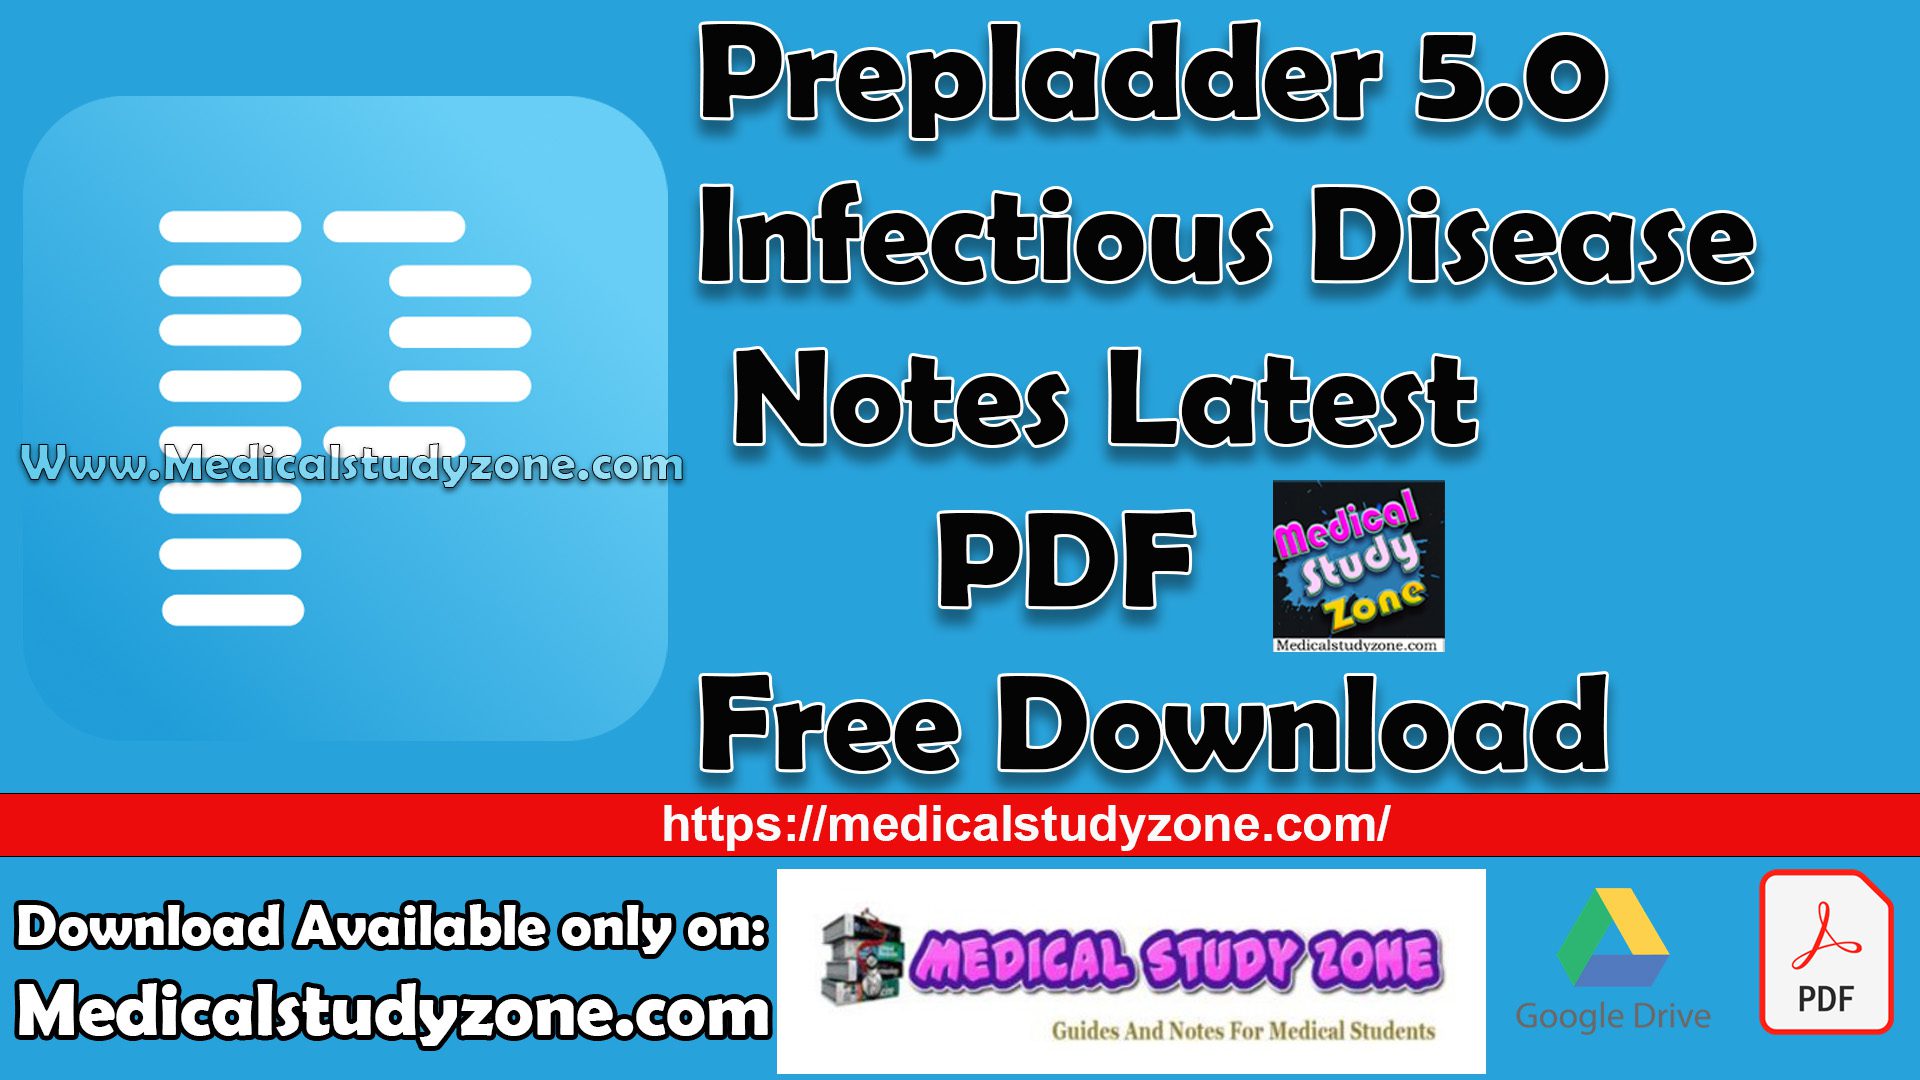 Prepladder 5.0 Infectious Disease Notes PDF Free Download